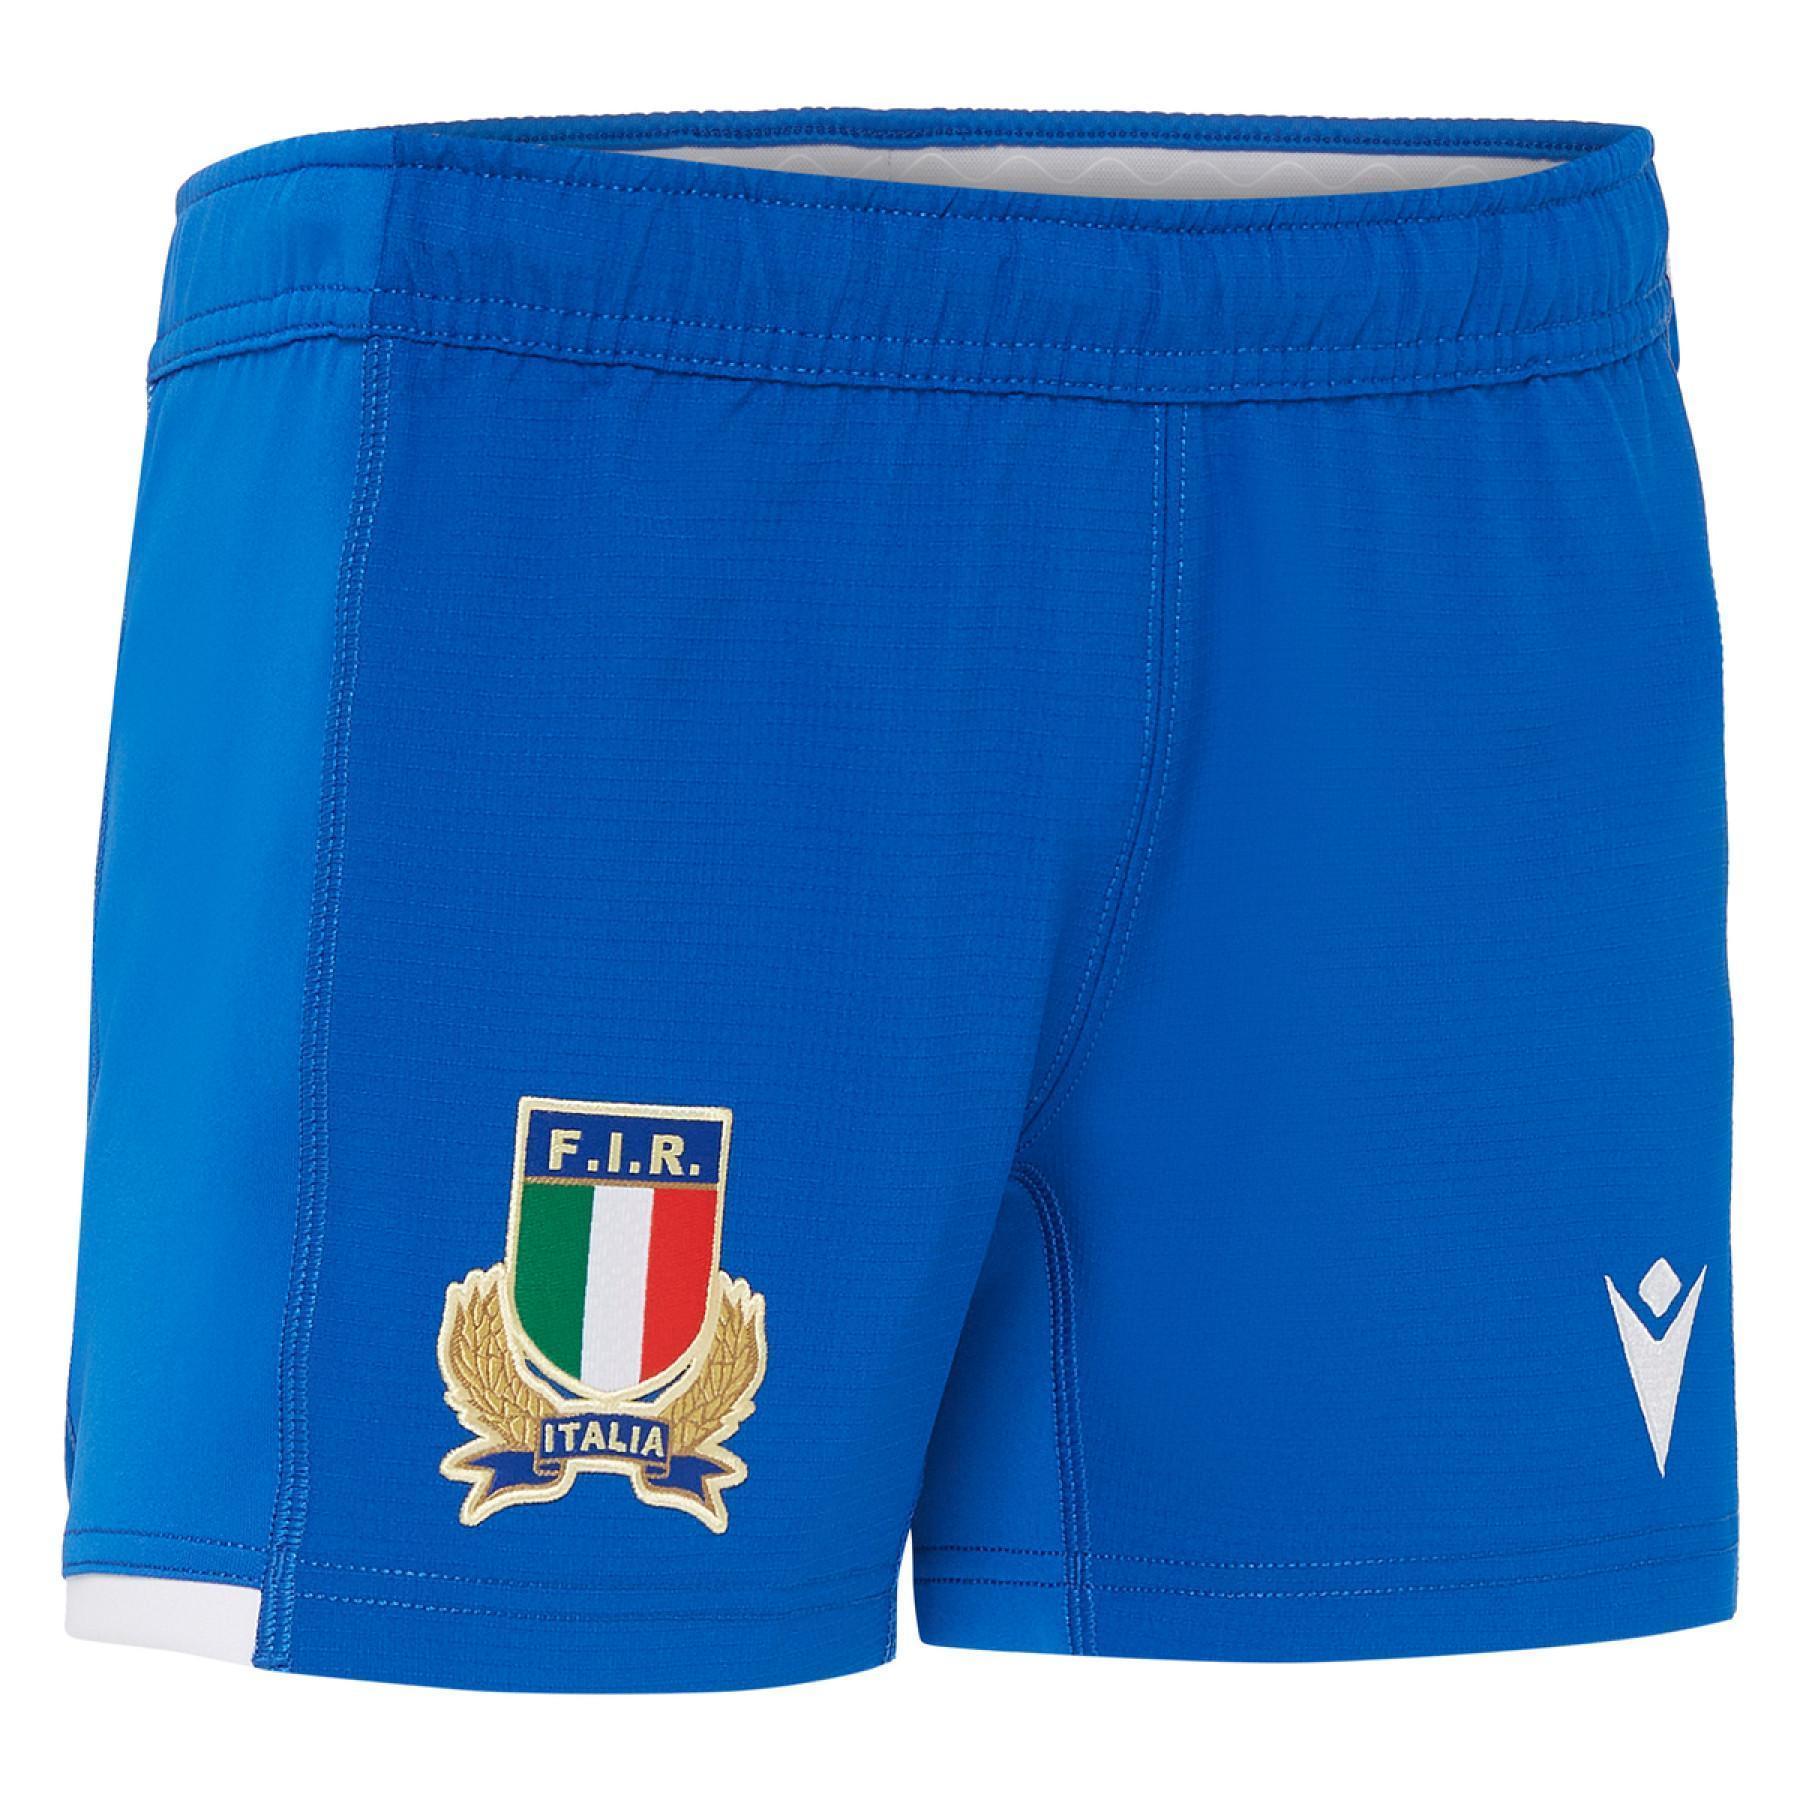 Children's outdoor shorts competitionItalie rugby 2020/21